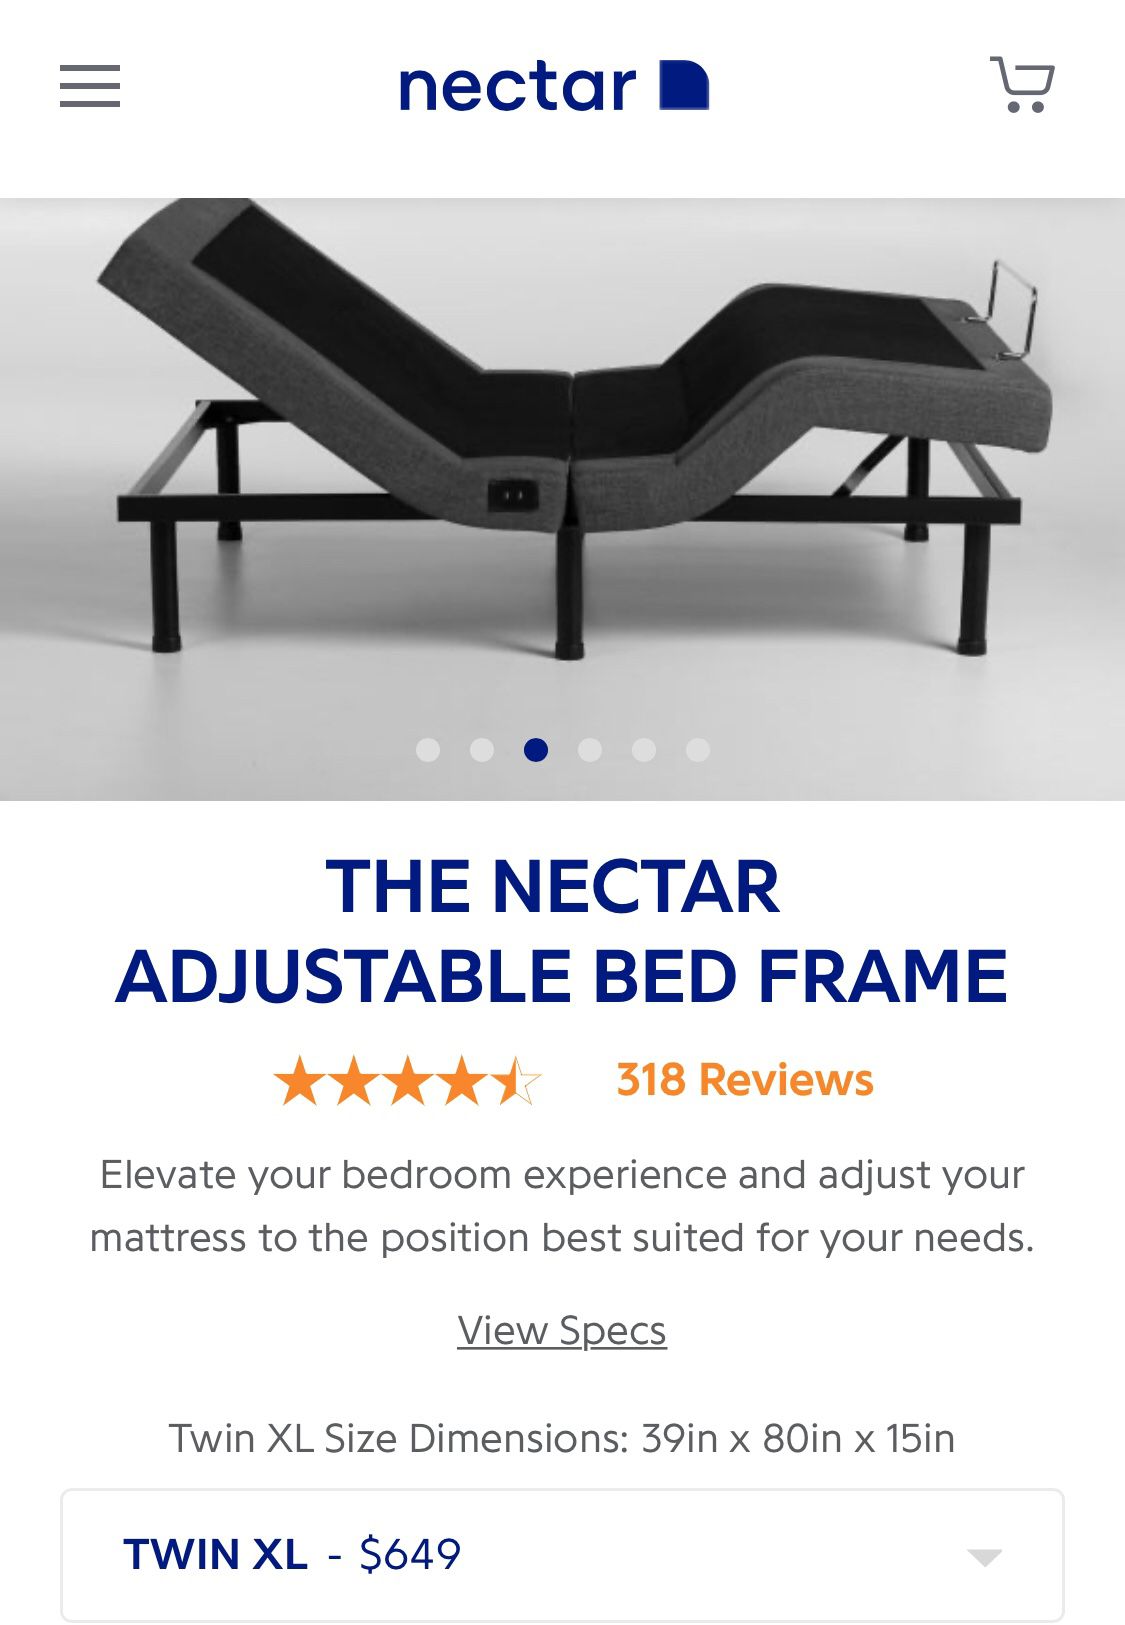 Nectar - twin xl adjustable bed frame with remote